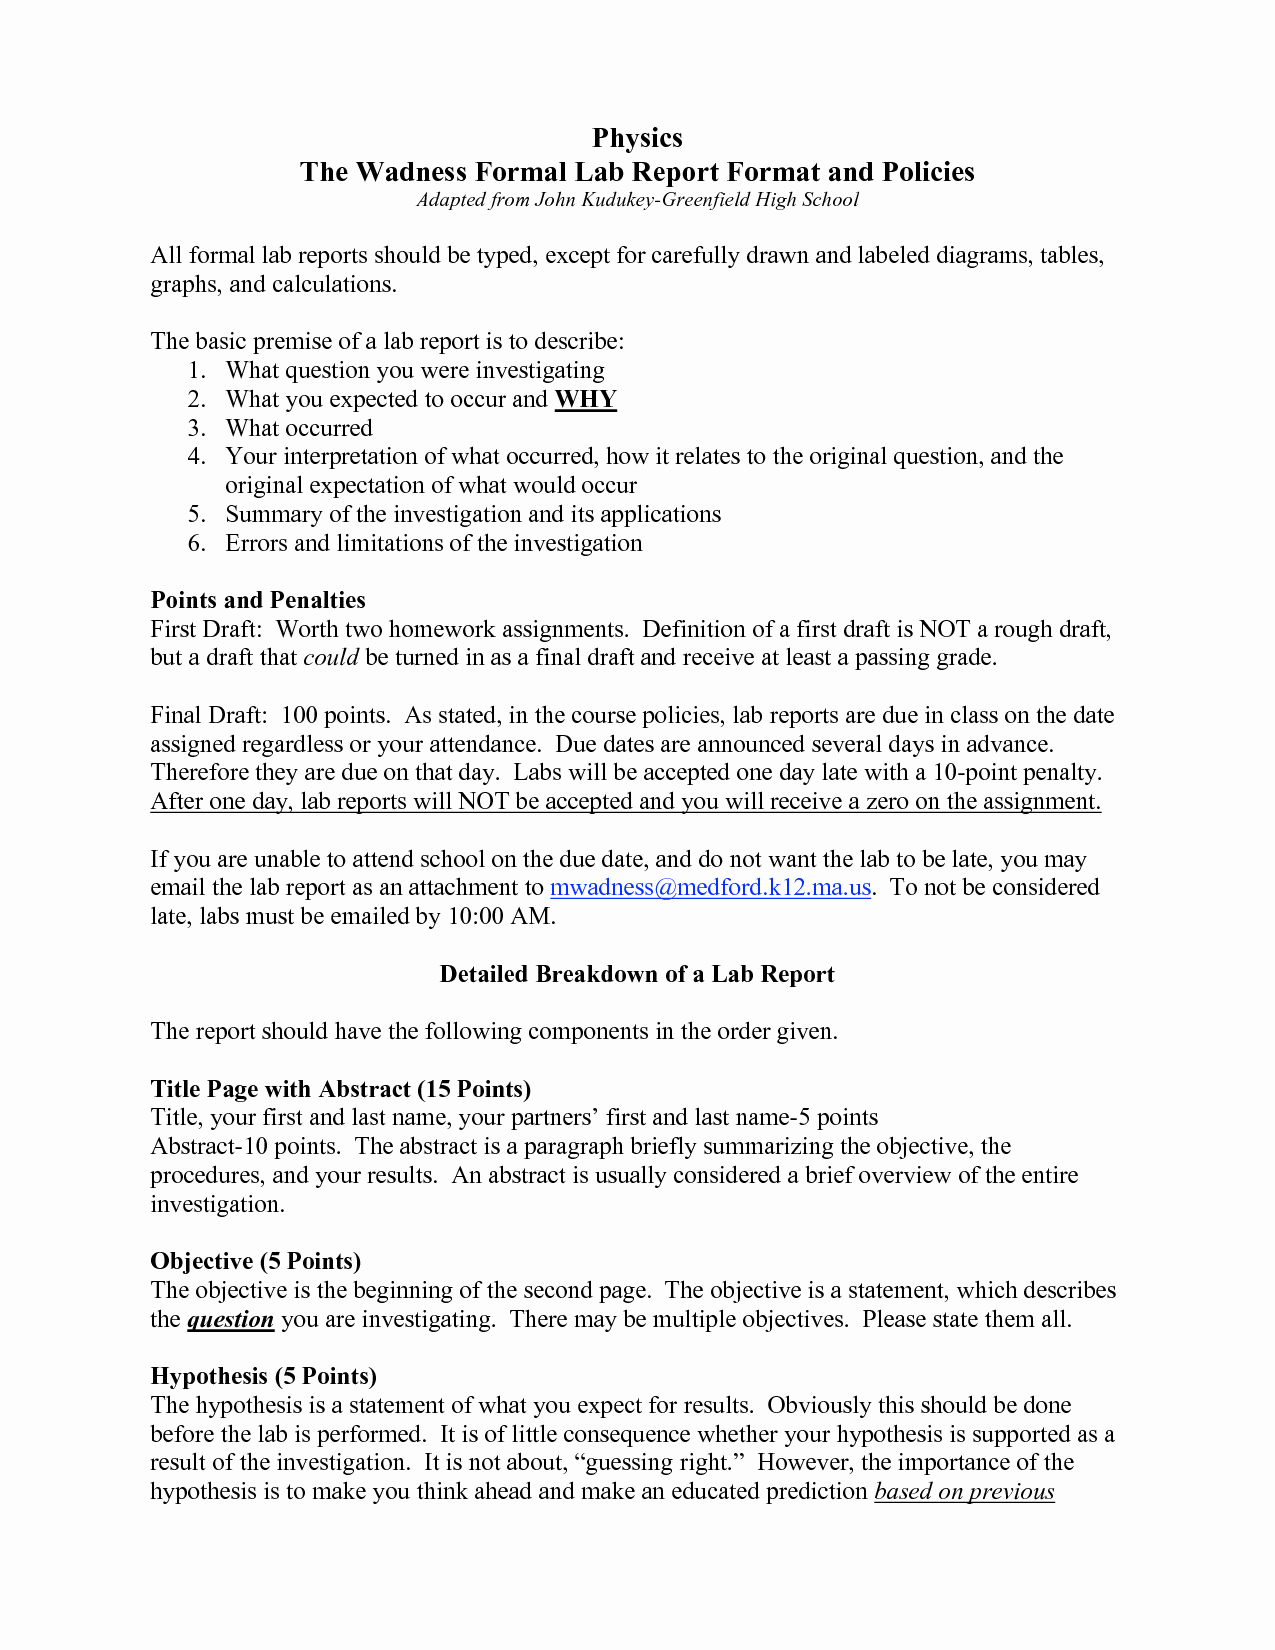 Formal Lab Report Template Luxury formal Lab Report Template Physics Biological Science